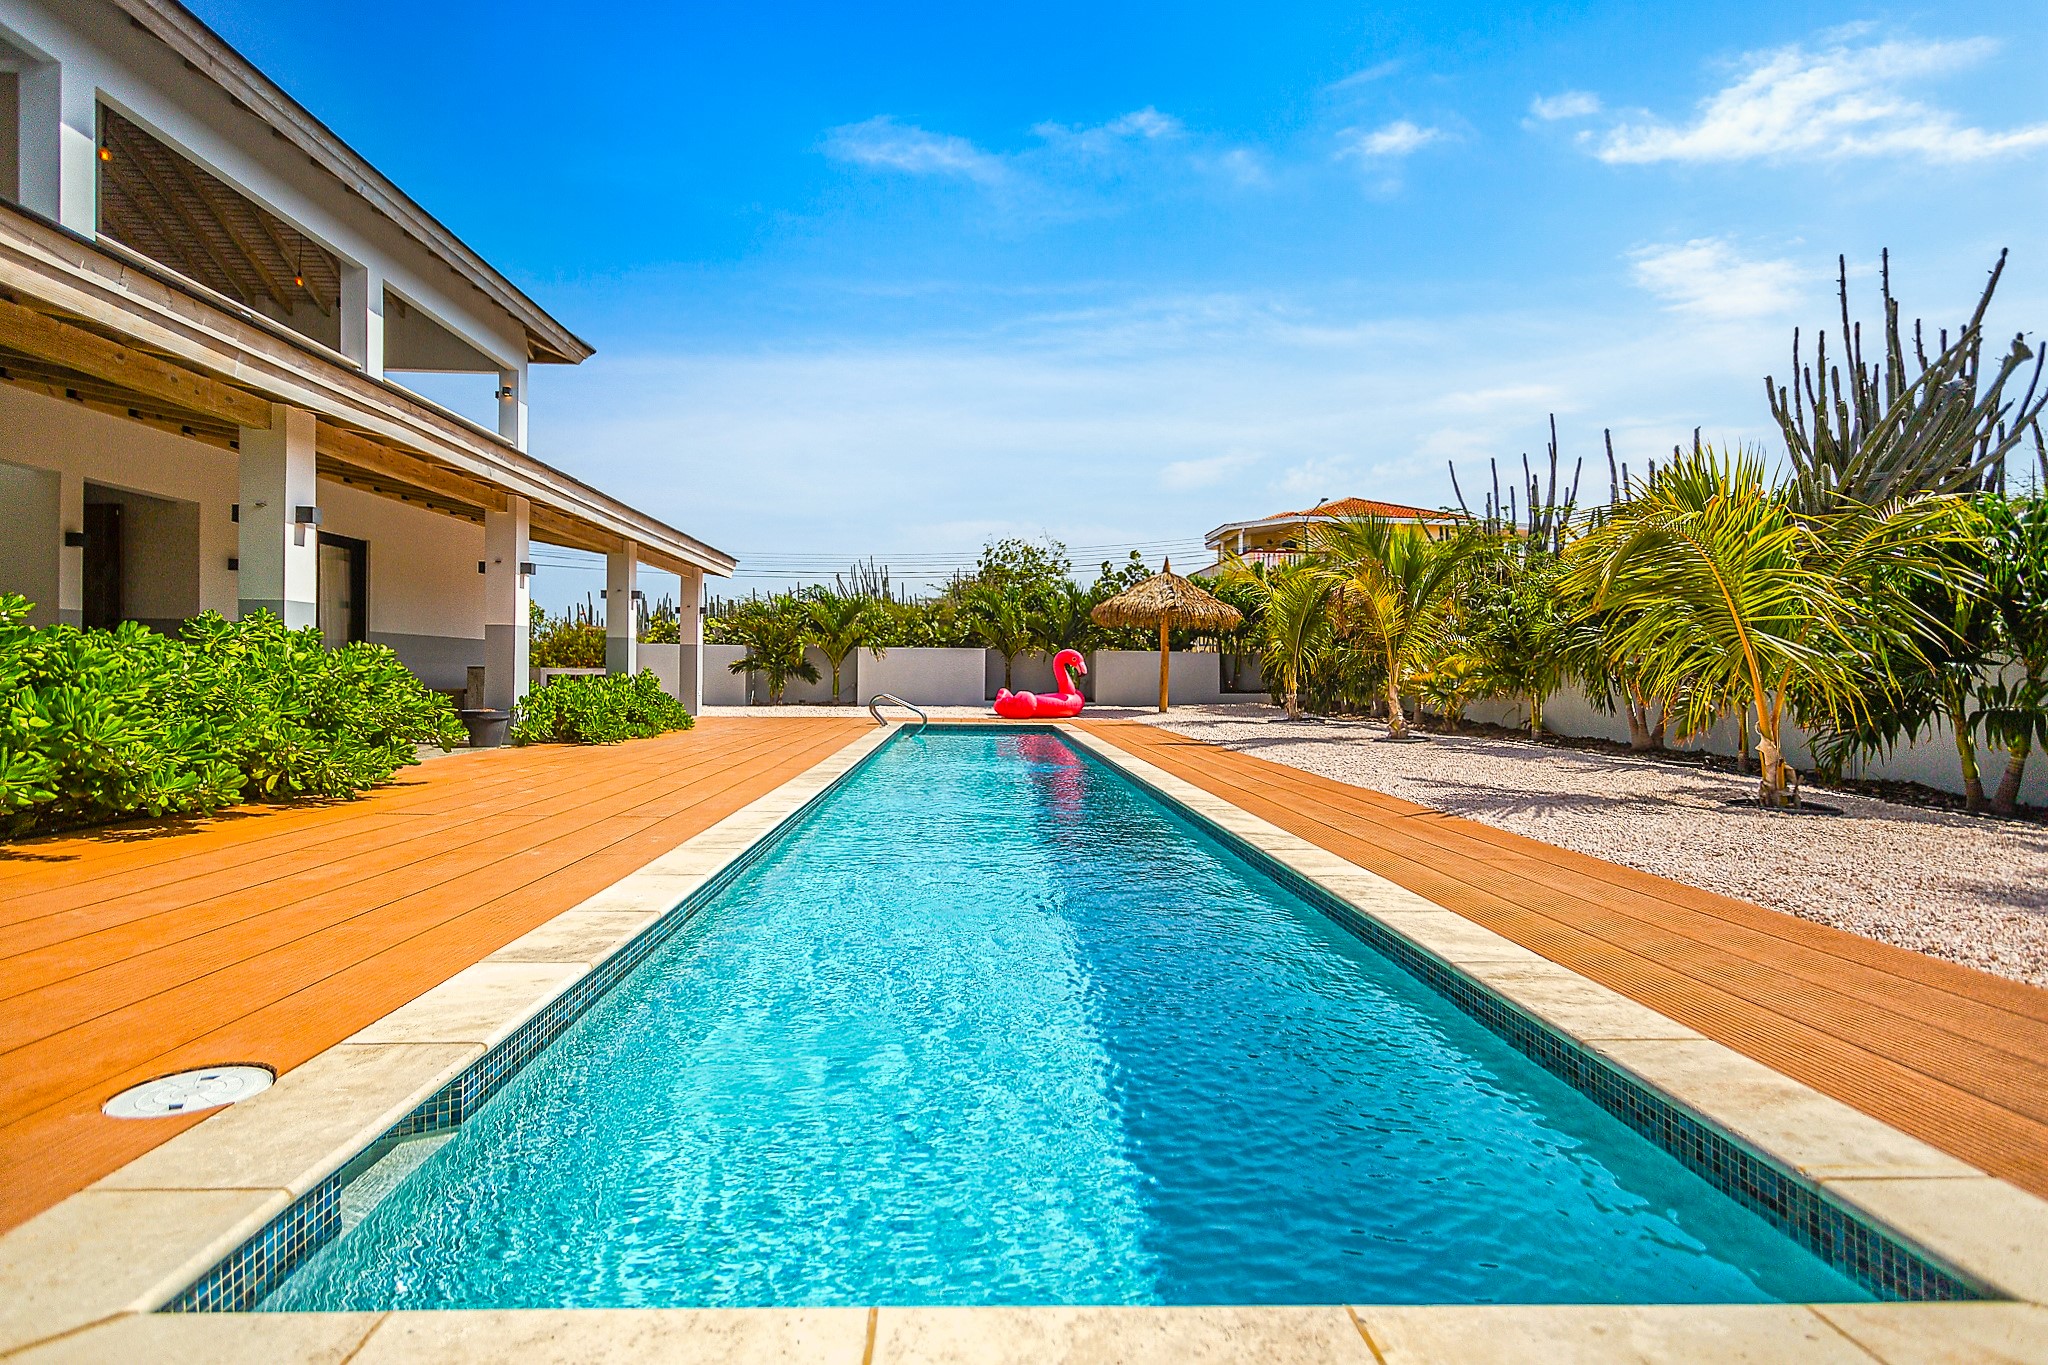 Dive into luxury with your own private pool, exclusive to our villa guests.